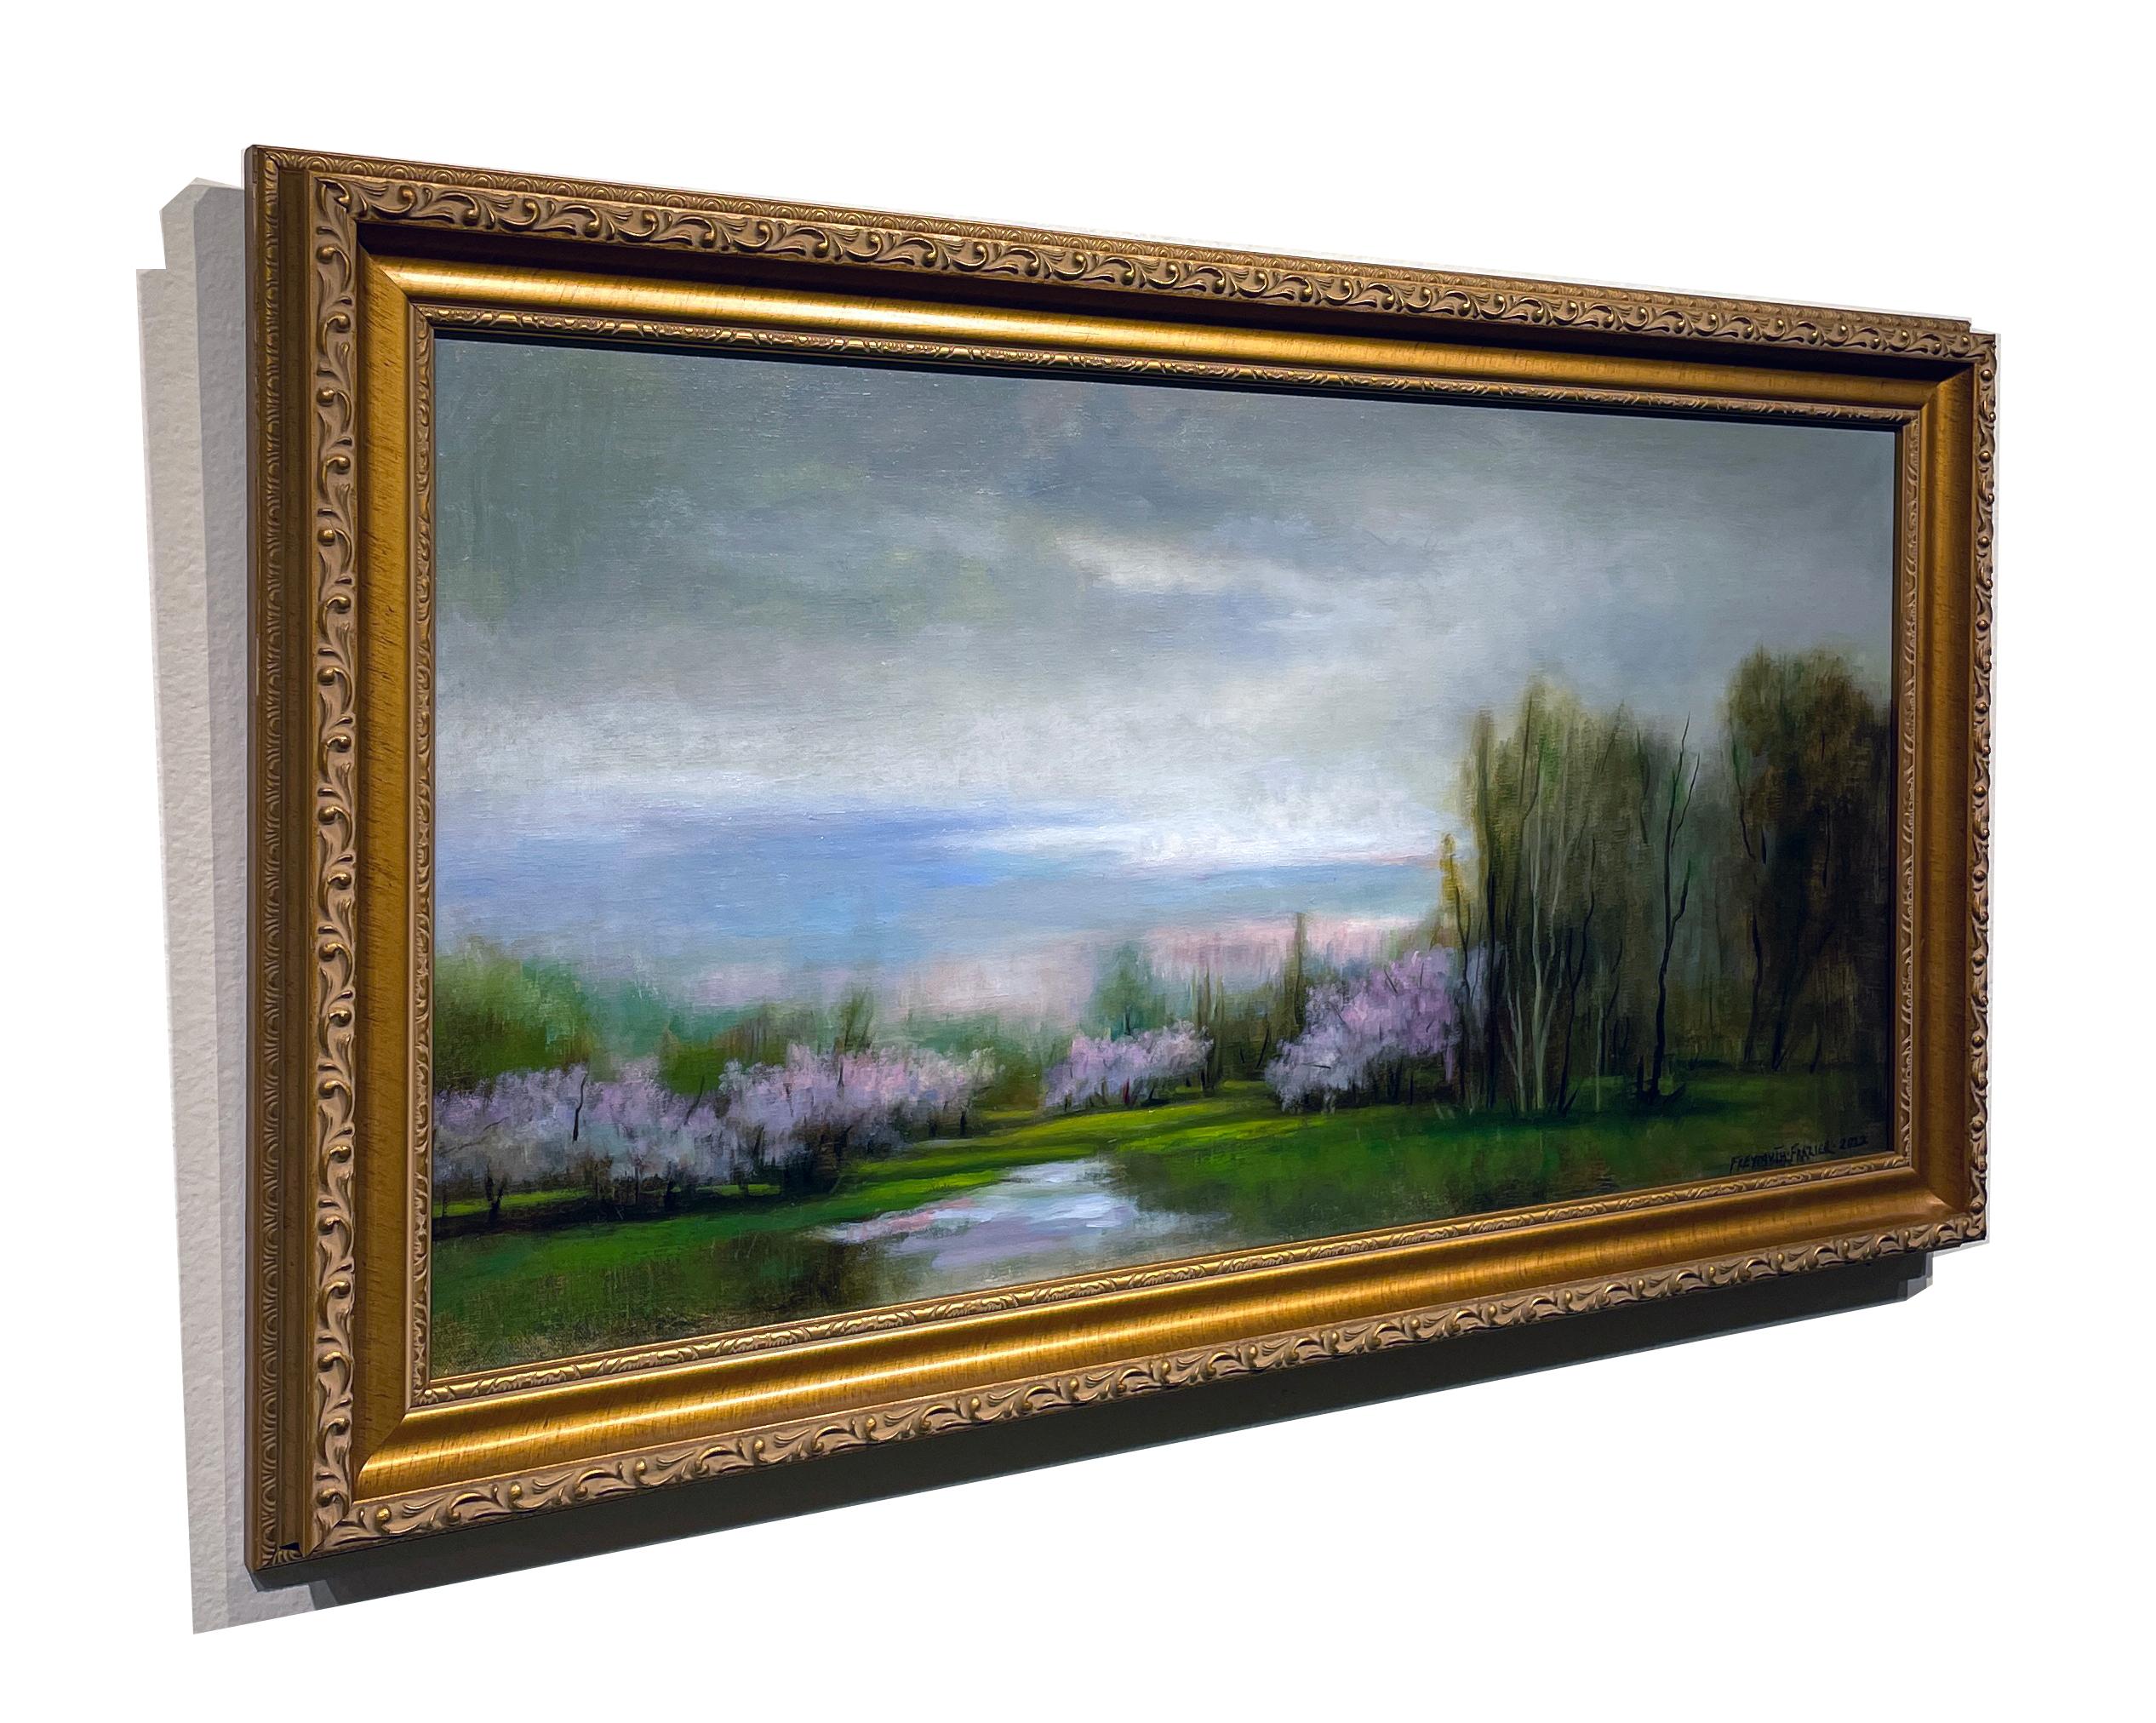 Cloud Cover - Early Spring Landscape with Pastel Flowering Trees, Original Oil  - Contemporary Painting by Rose Freymuth-Frazier